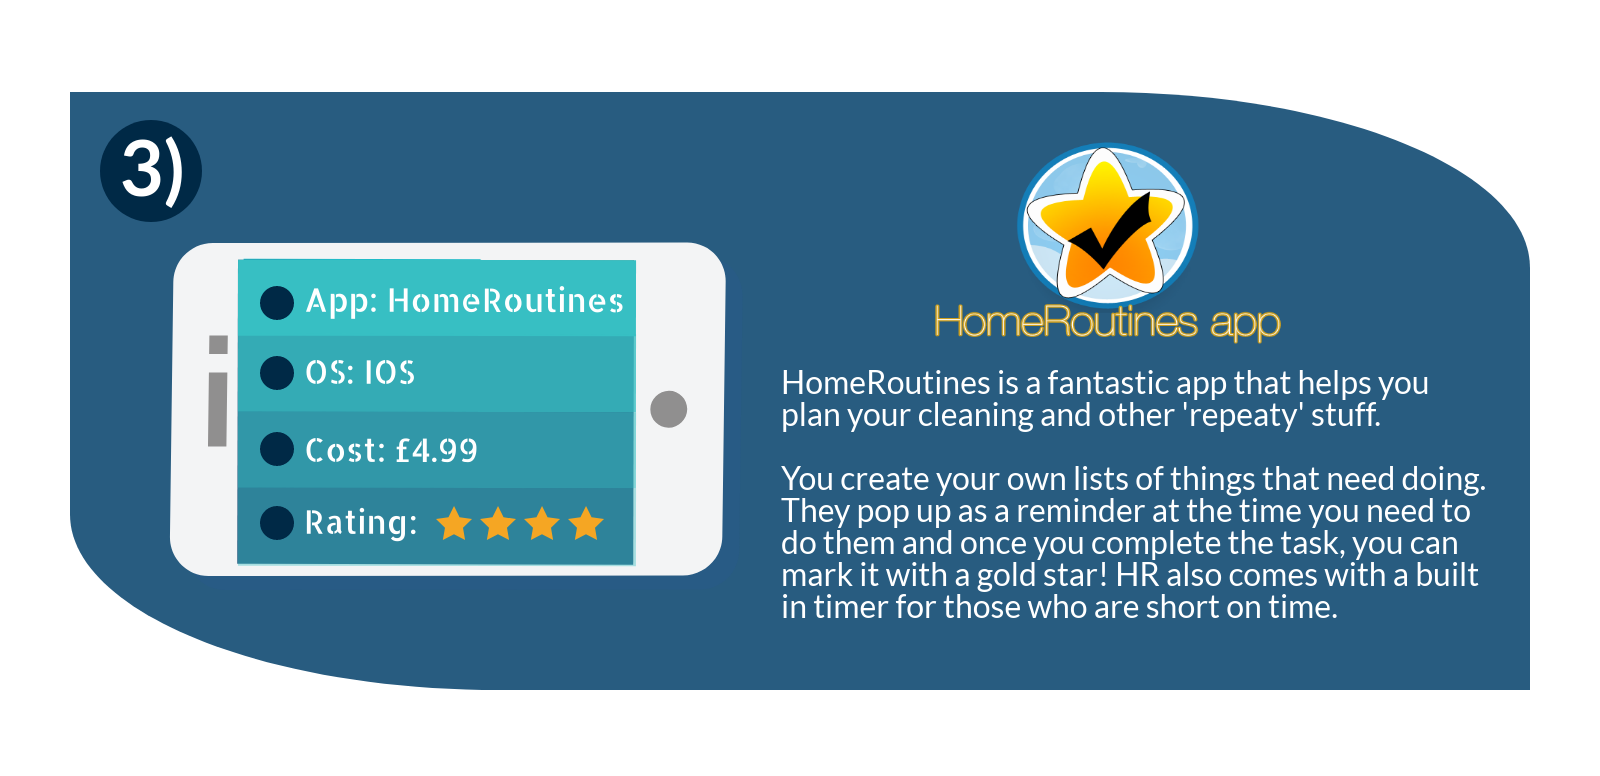 The home routines mobile app will allow you to plan your cleaning more efficiently